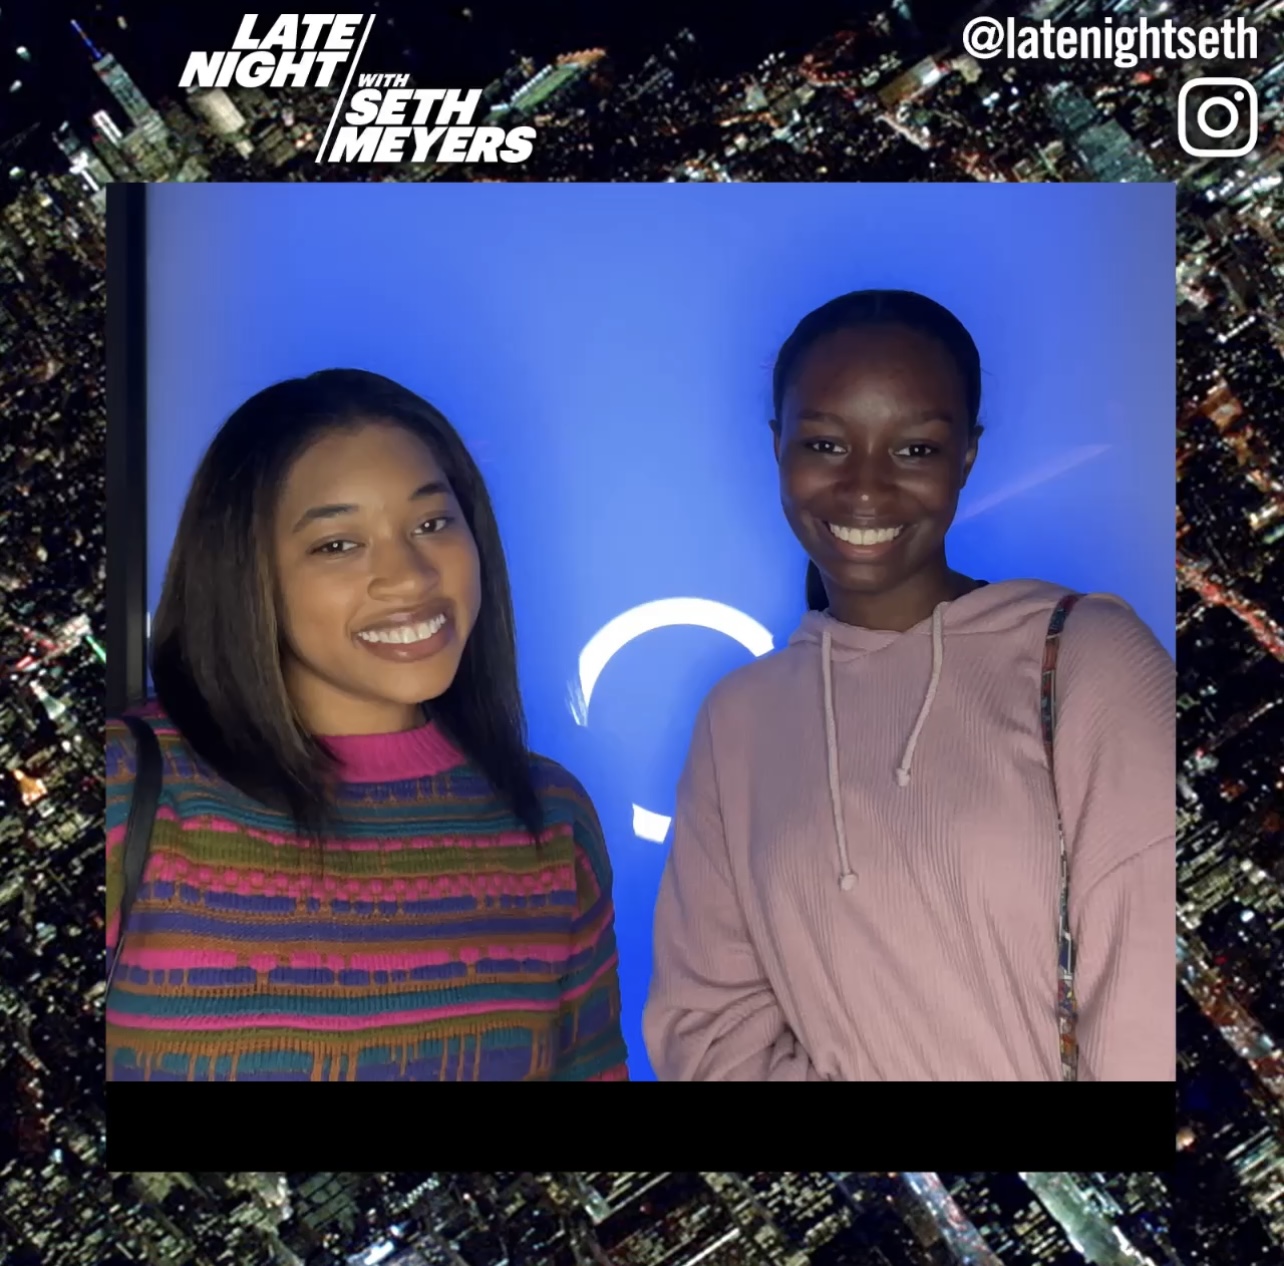 Two Black students experiencing entertainment in New York City at a taping of “Late Night with Seth Meyers.”